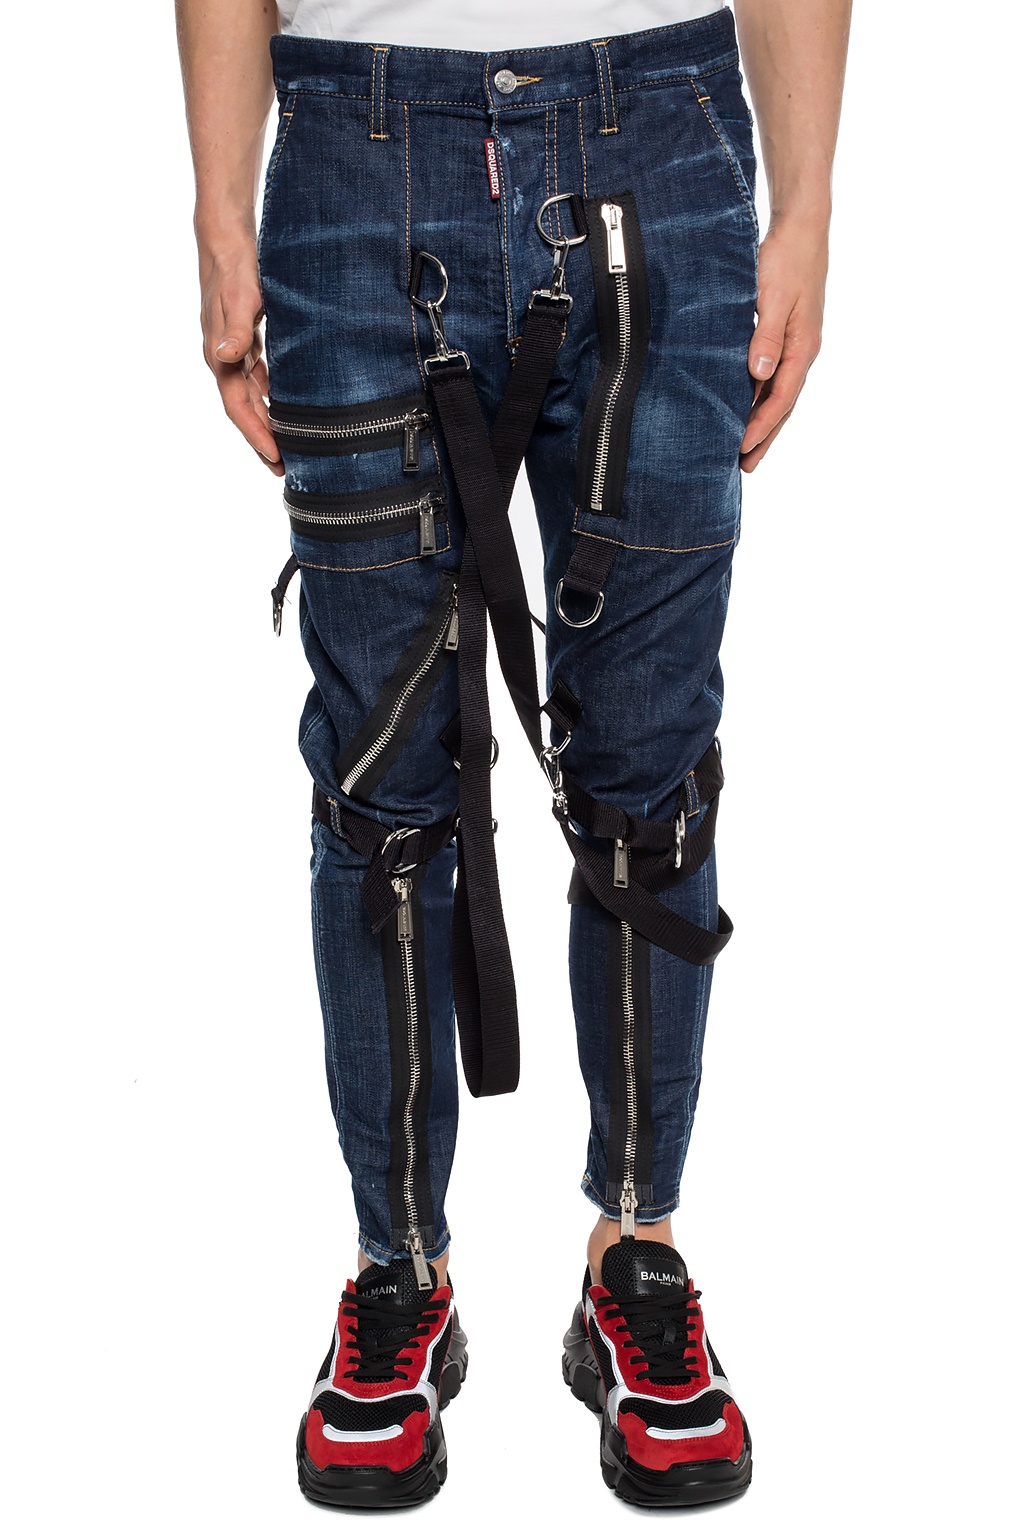 Dsquared2 'Military Jean' distressed jeans | Men's Clothing | Vitkac